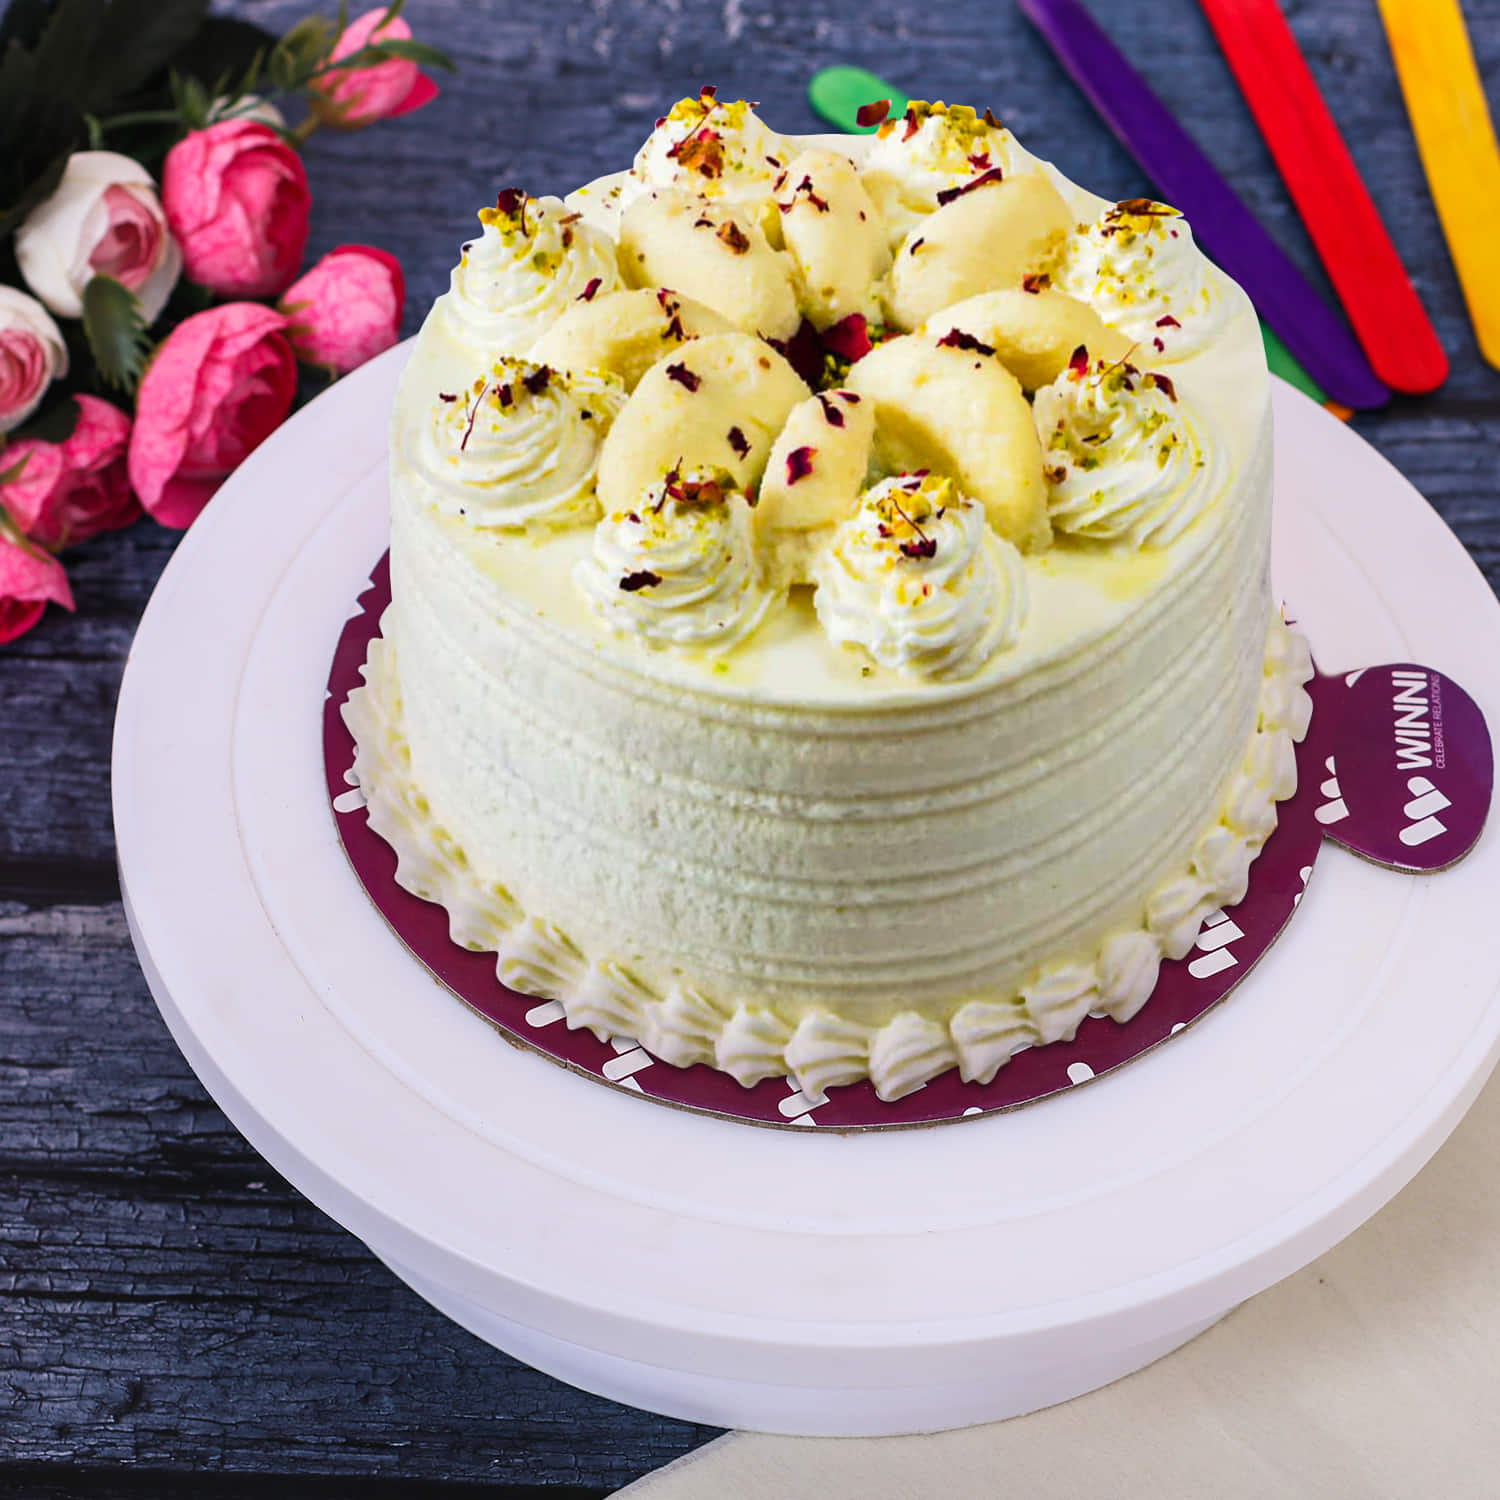 WS Bakers - A flavor that keeps getting better over time. Order our Rasmalai  Cake to make a great delight for any occasion. #WSBakers #pune #bakery  #punefoodie #punefoodlovers #punefoodhunt #chocolatelovers #cakes #pastry #